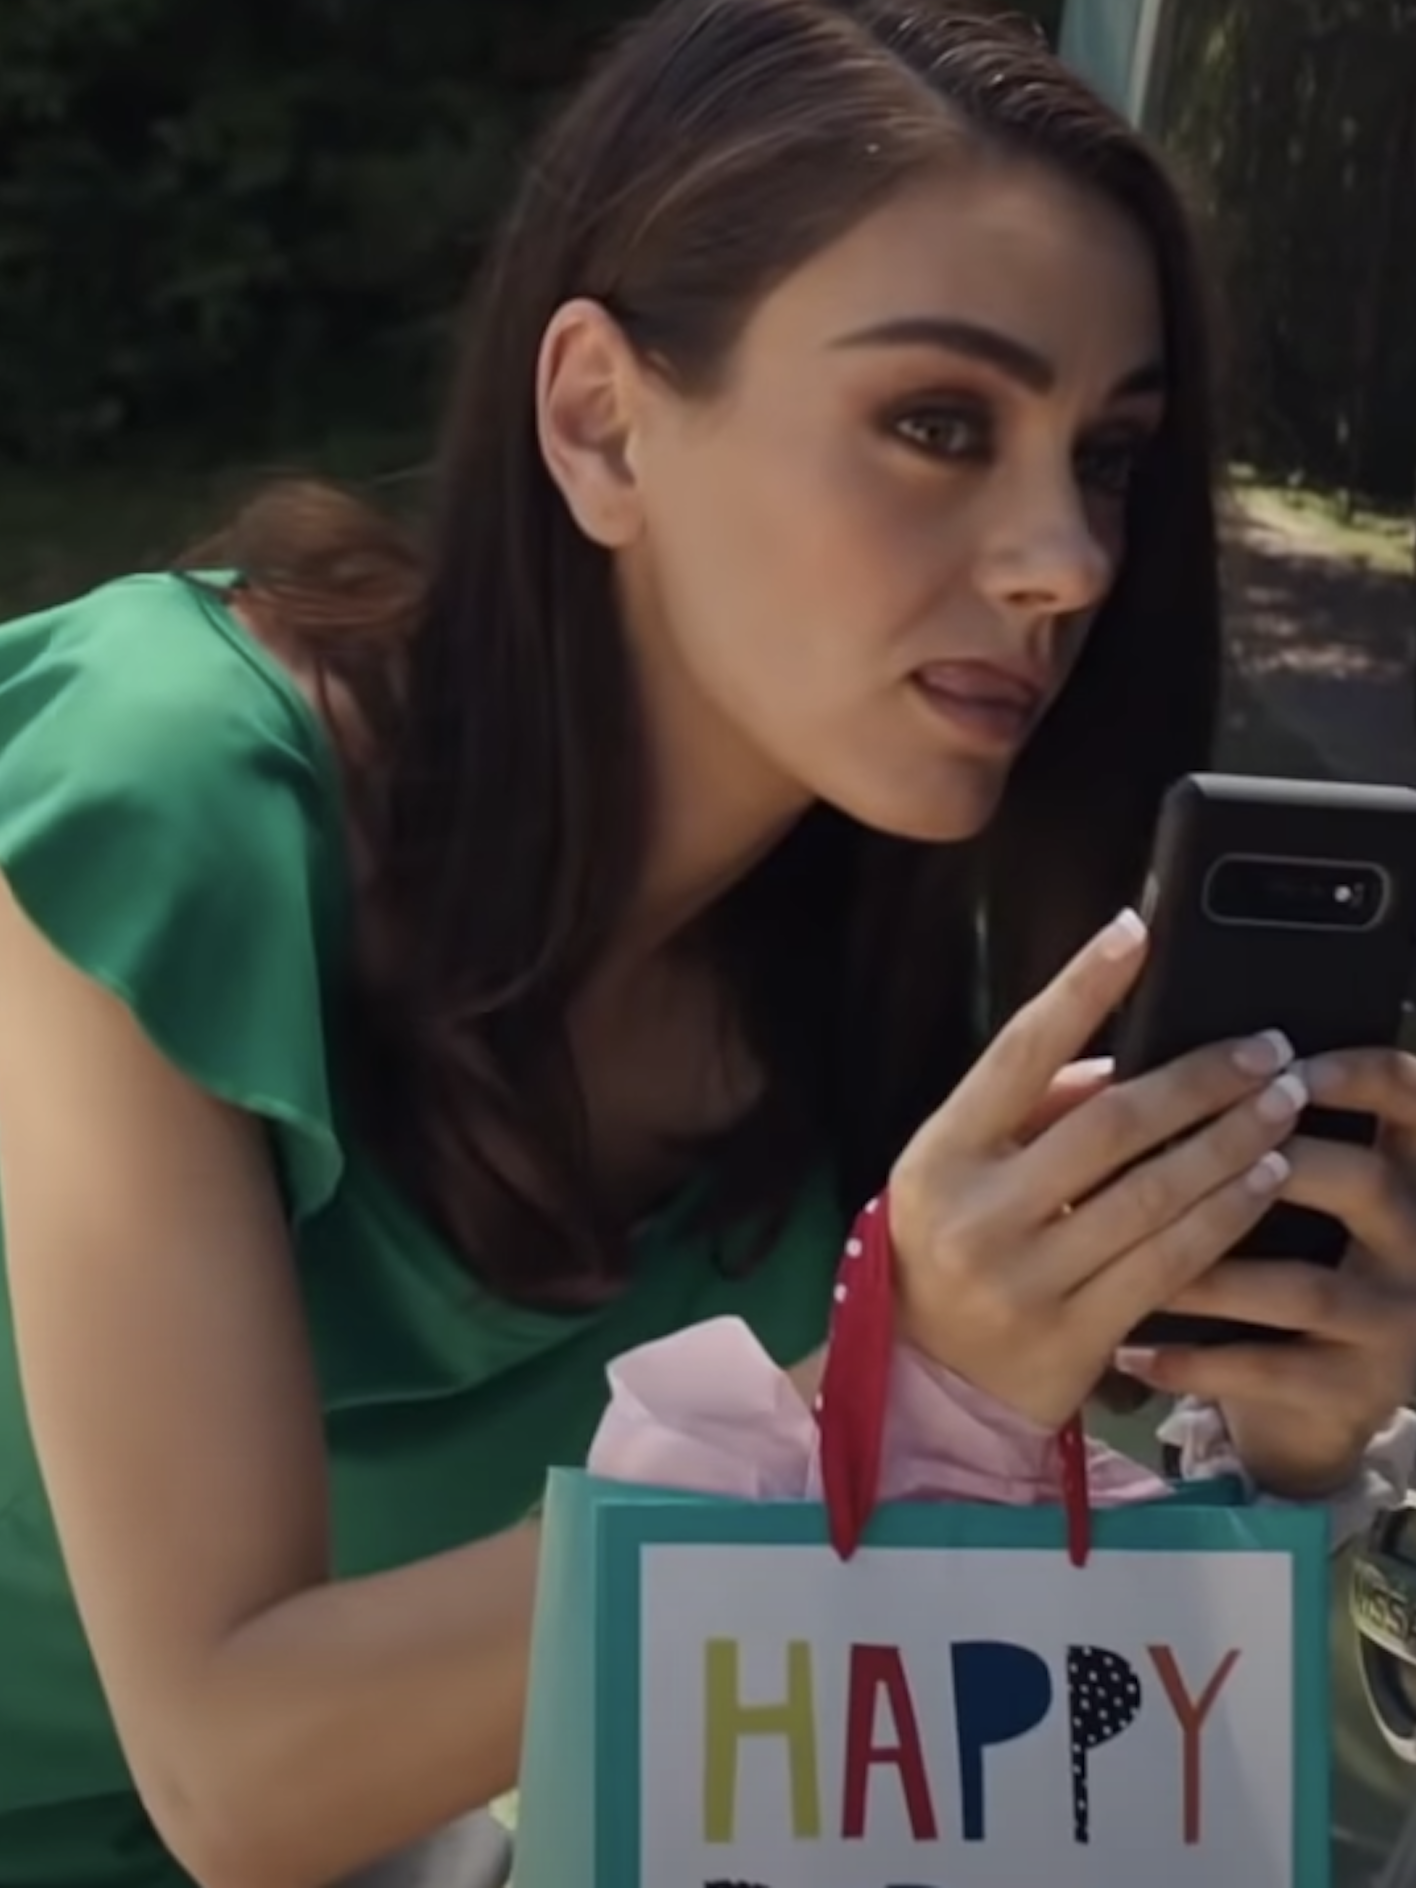 Mila Kunis holding an iPhone, spying on someone